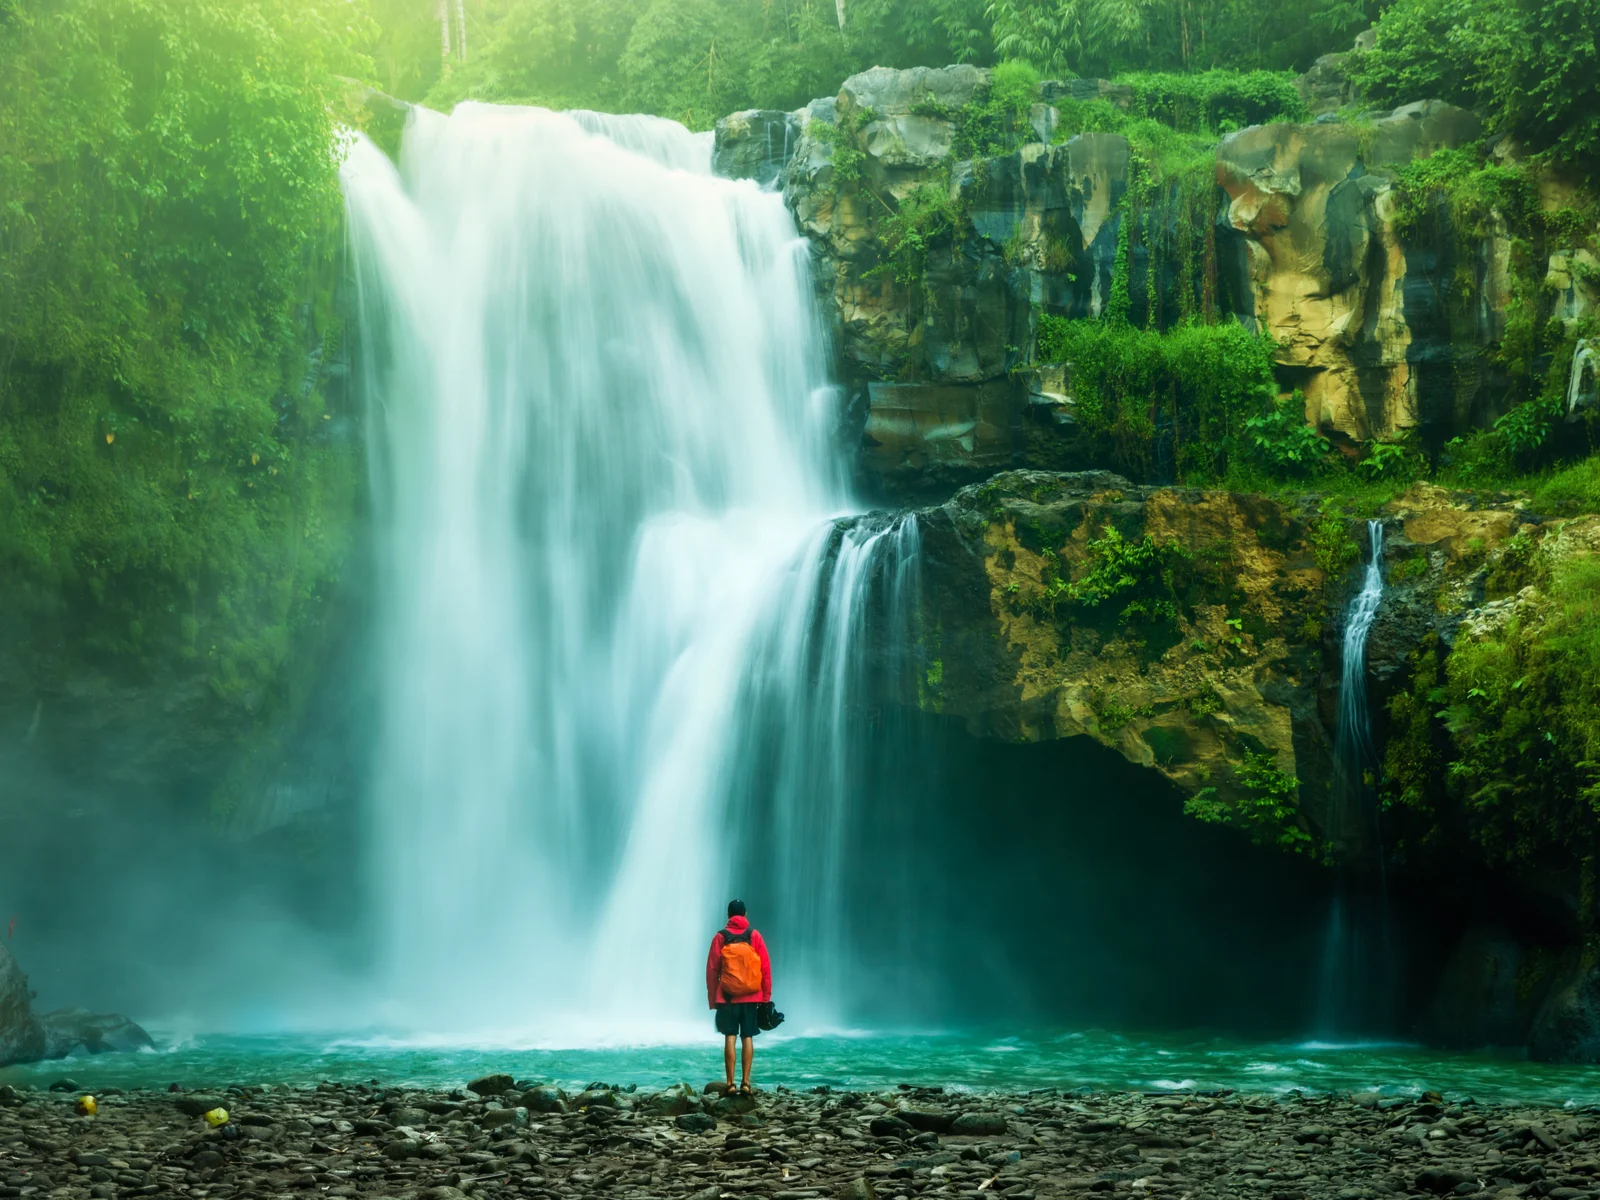 Waterfall pictured during the best time to visit brazil featuring a guy in hiking gear standing at the edge of the water